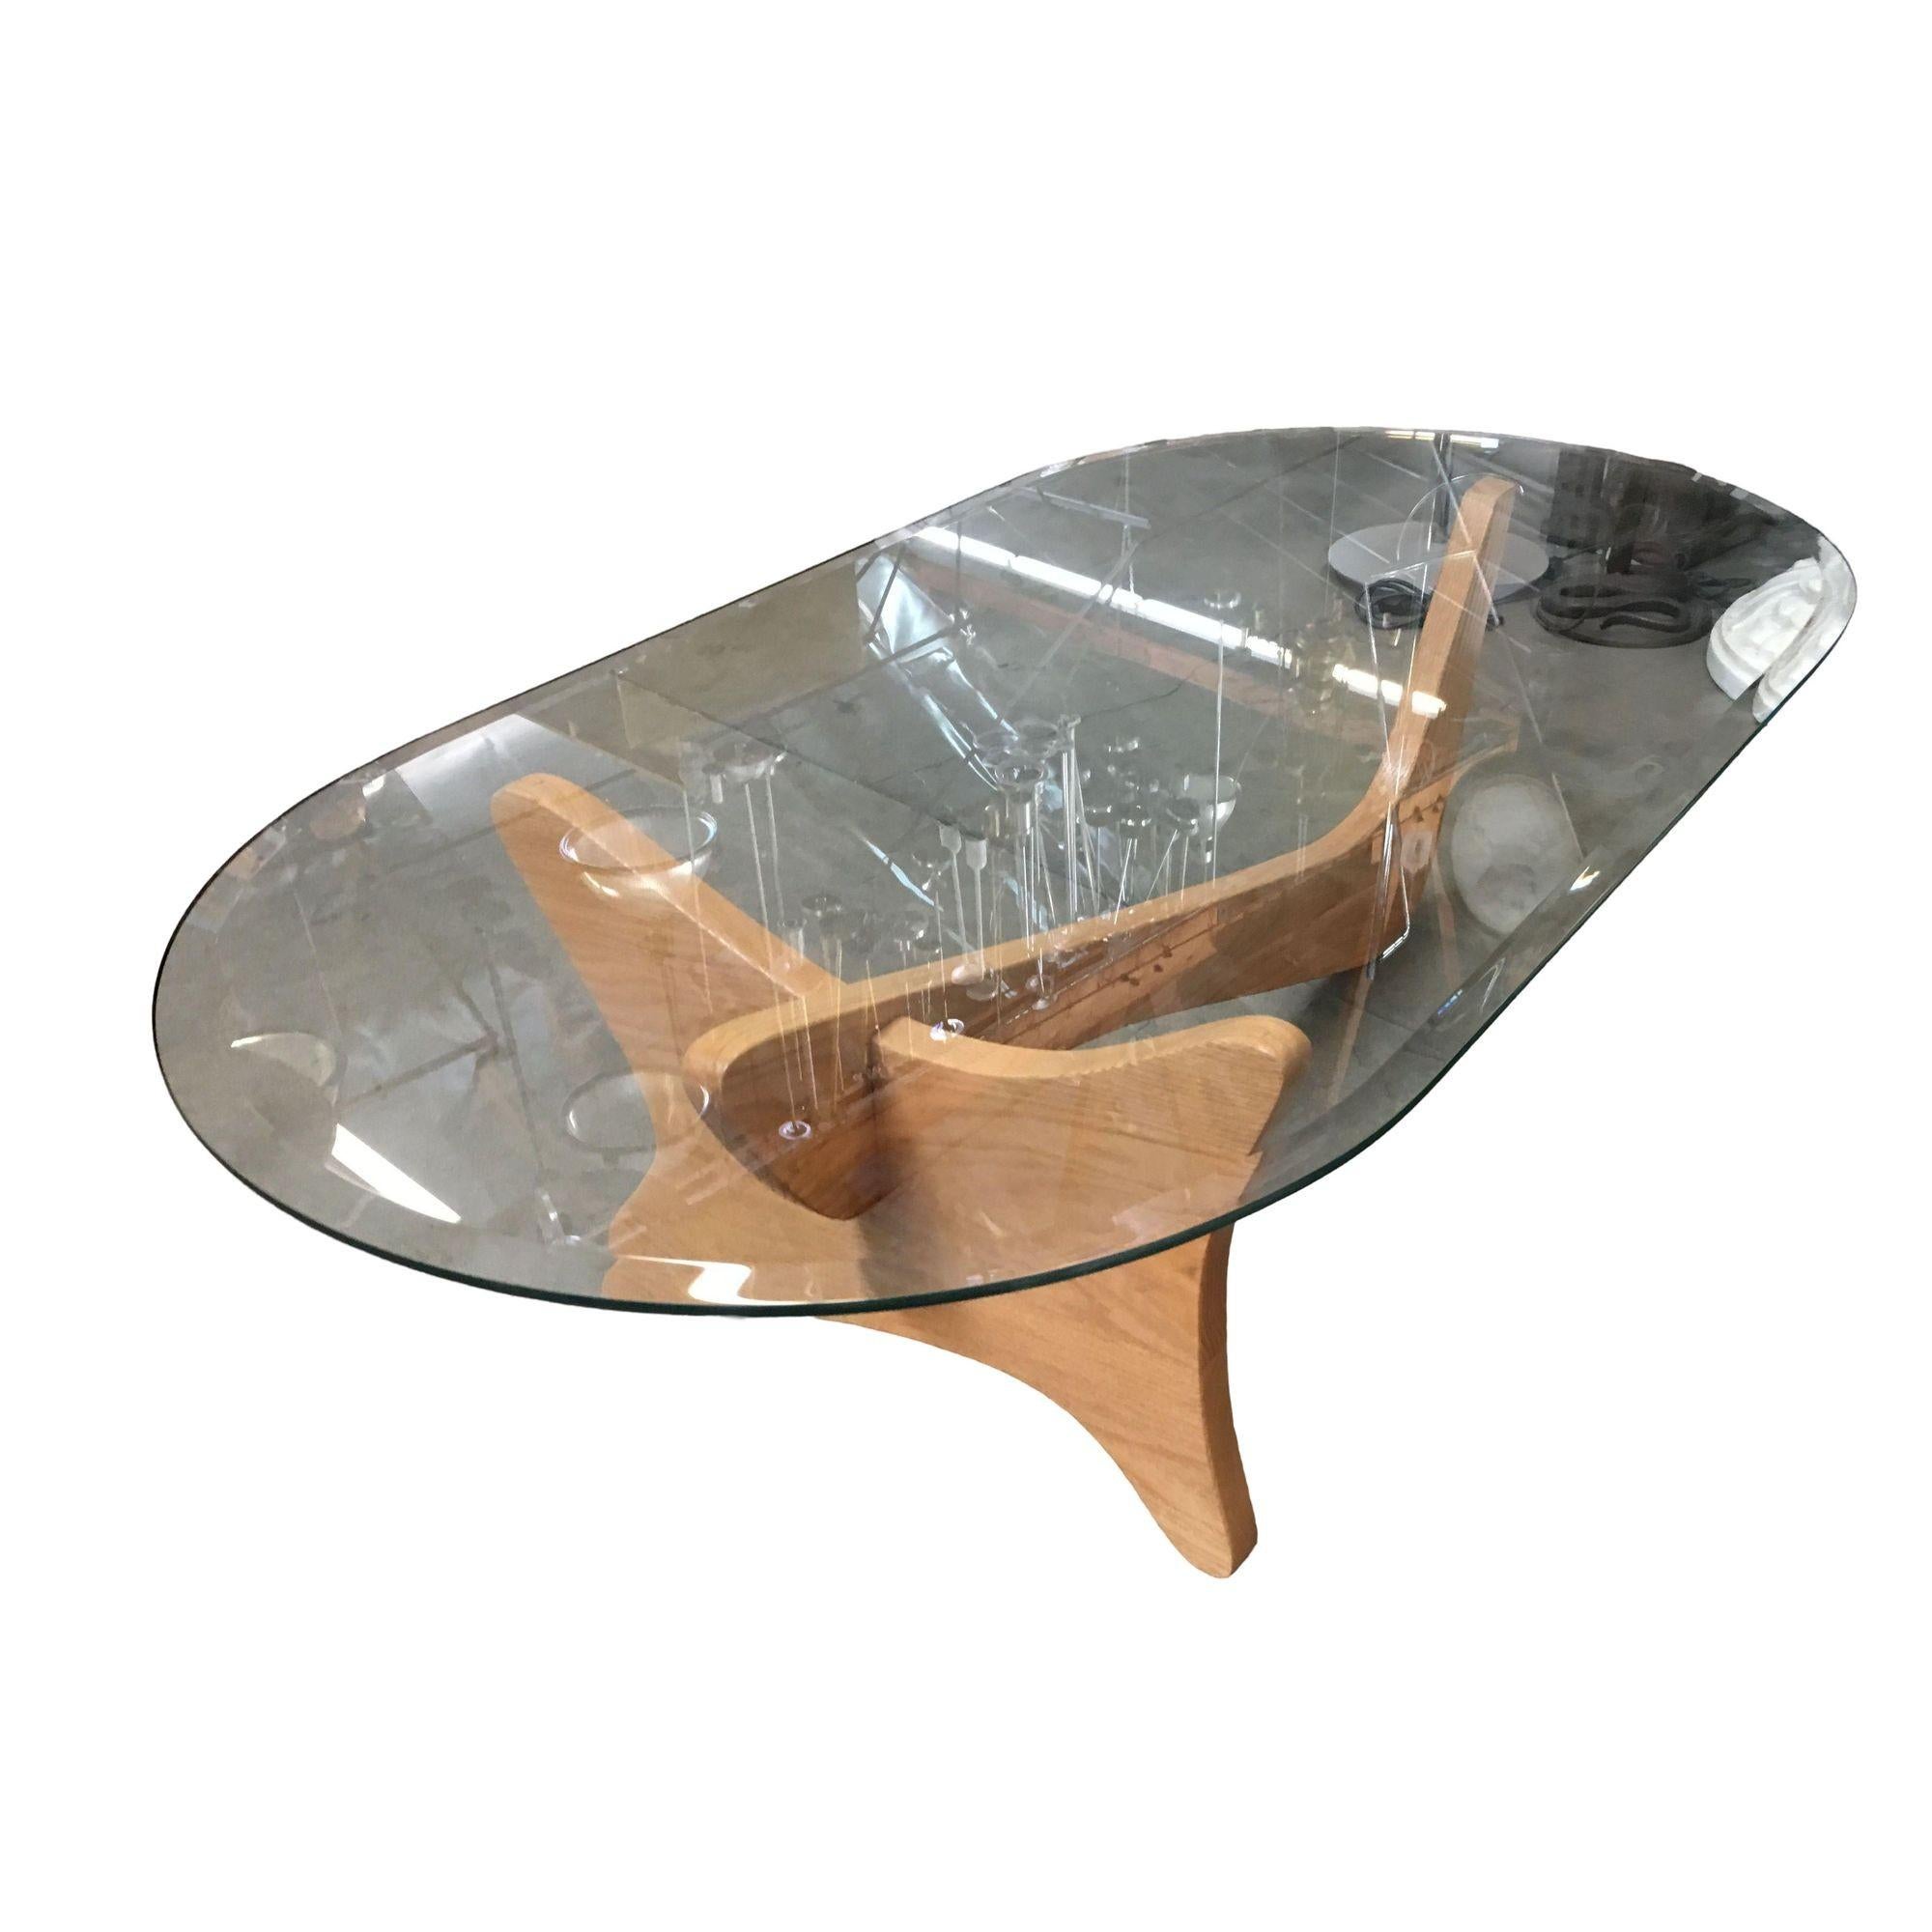 Mid-20th Century Mid-Century Modern Noguchi Style Oval Glass Coffee Table For Sale